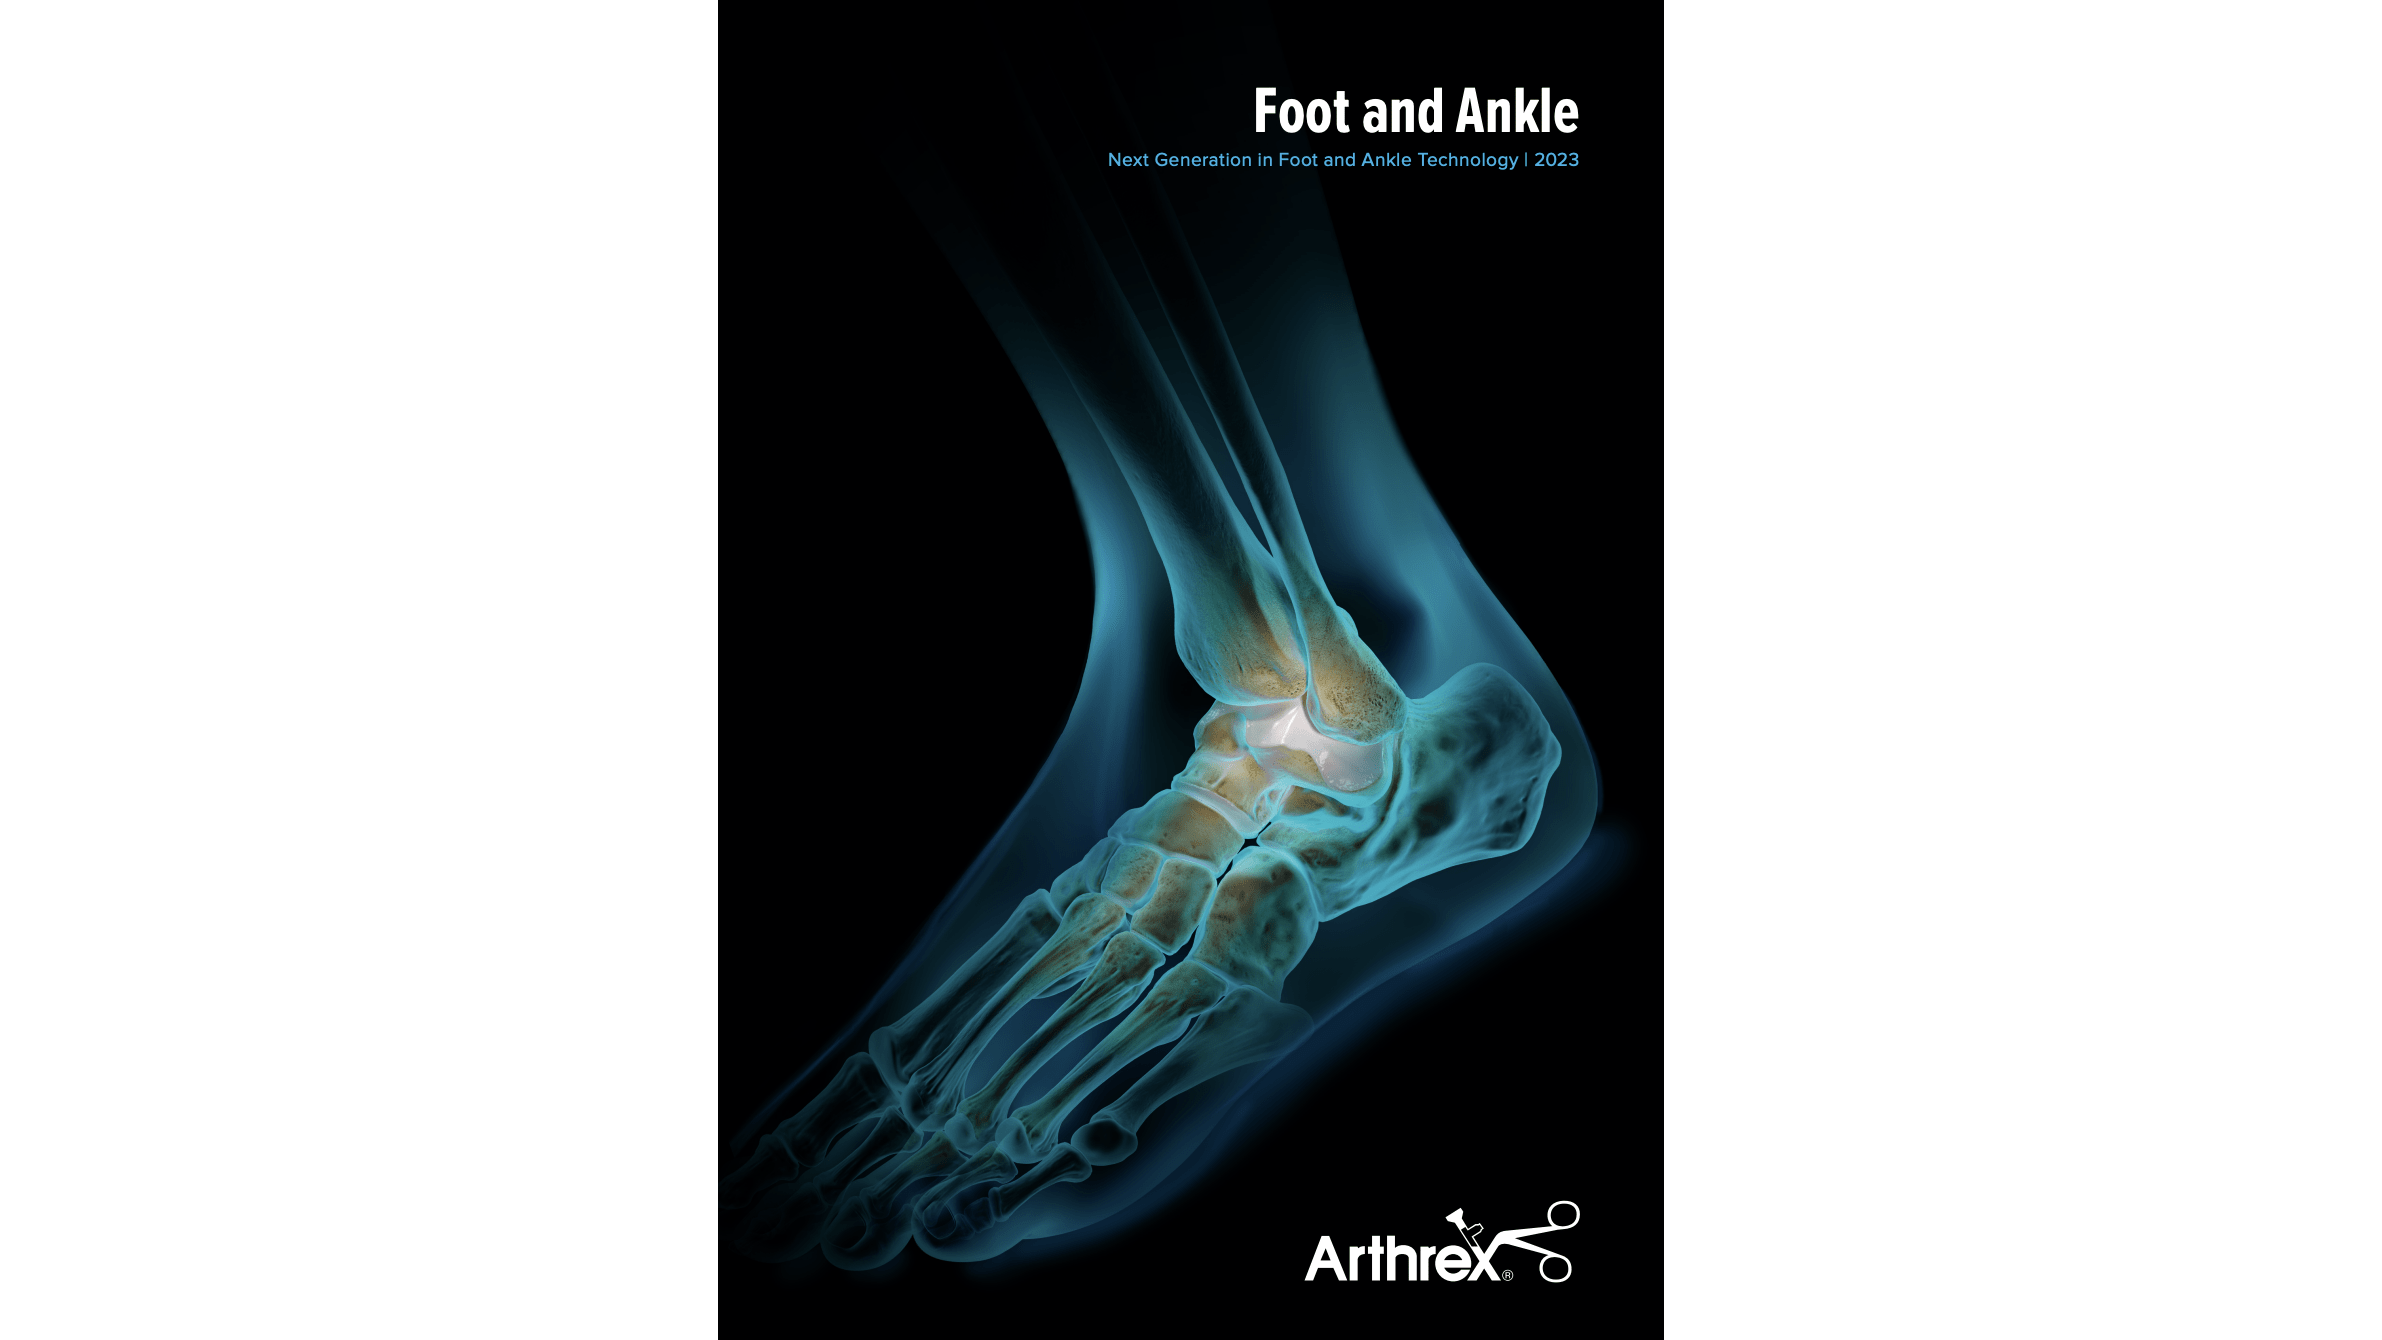 Foot and Ankle: Next Generation in Foot and Ankle Technology 2023